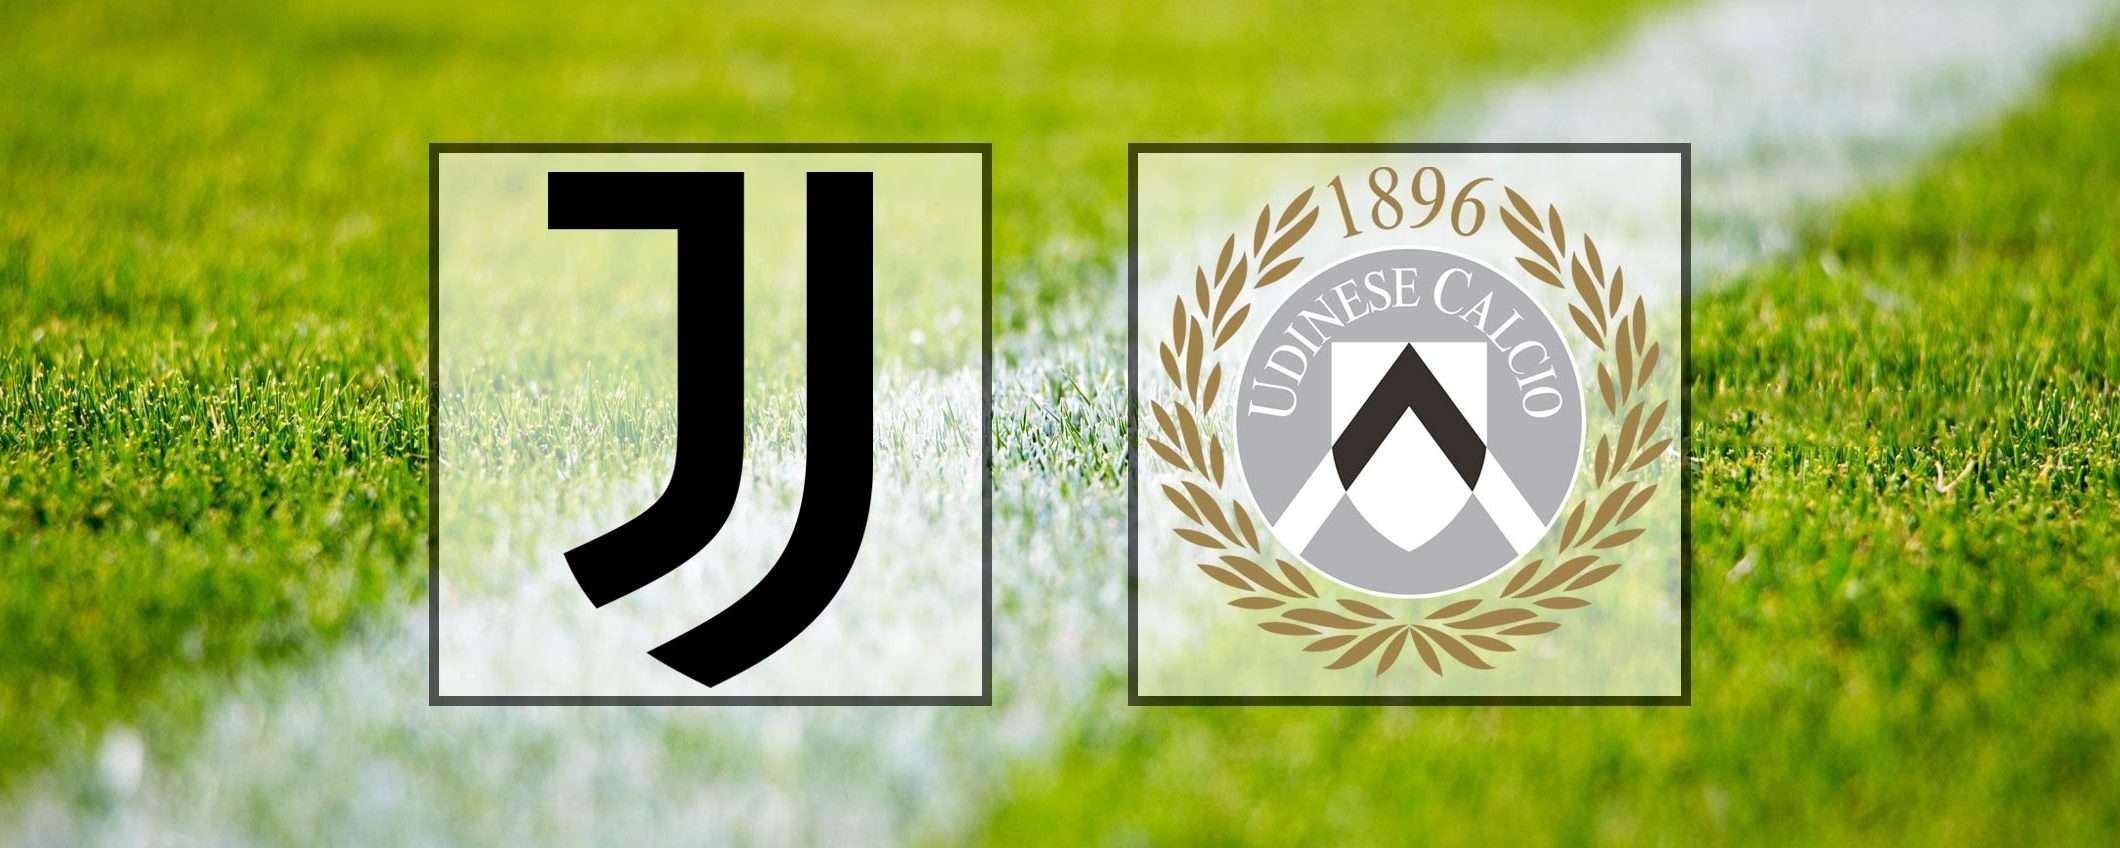 Come vedere Juventus-Udinese in streaming